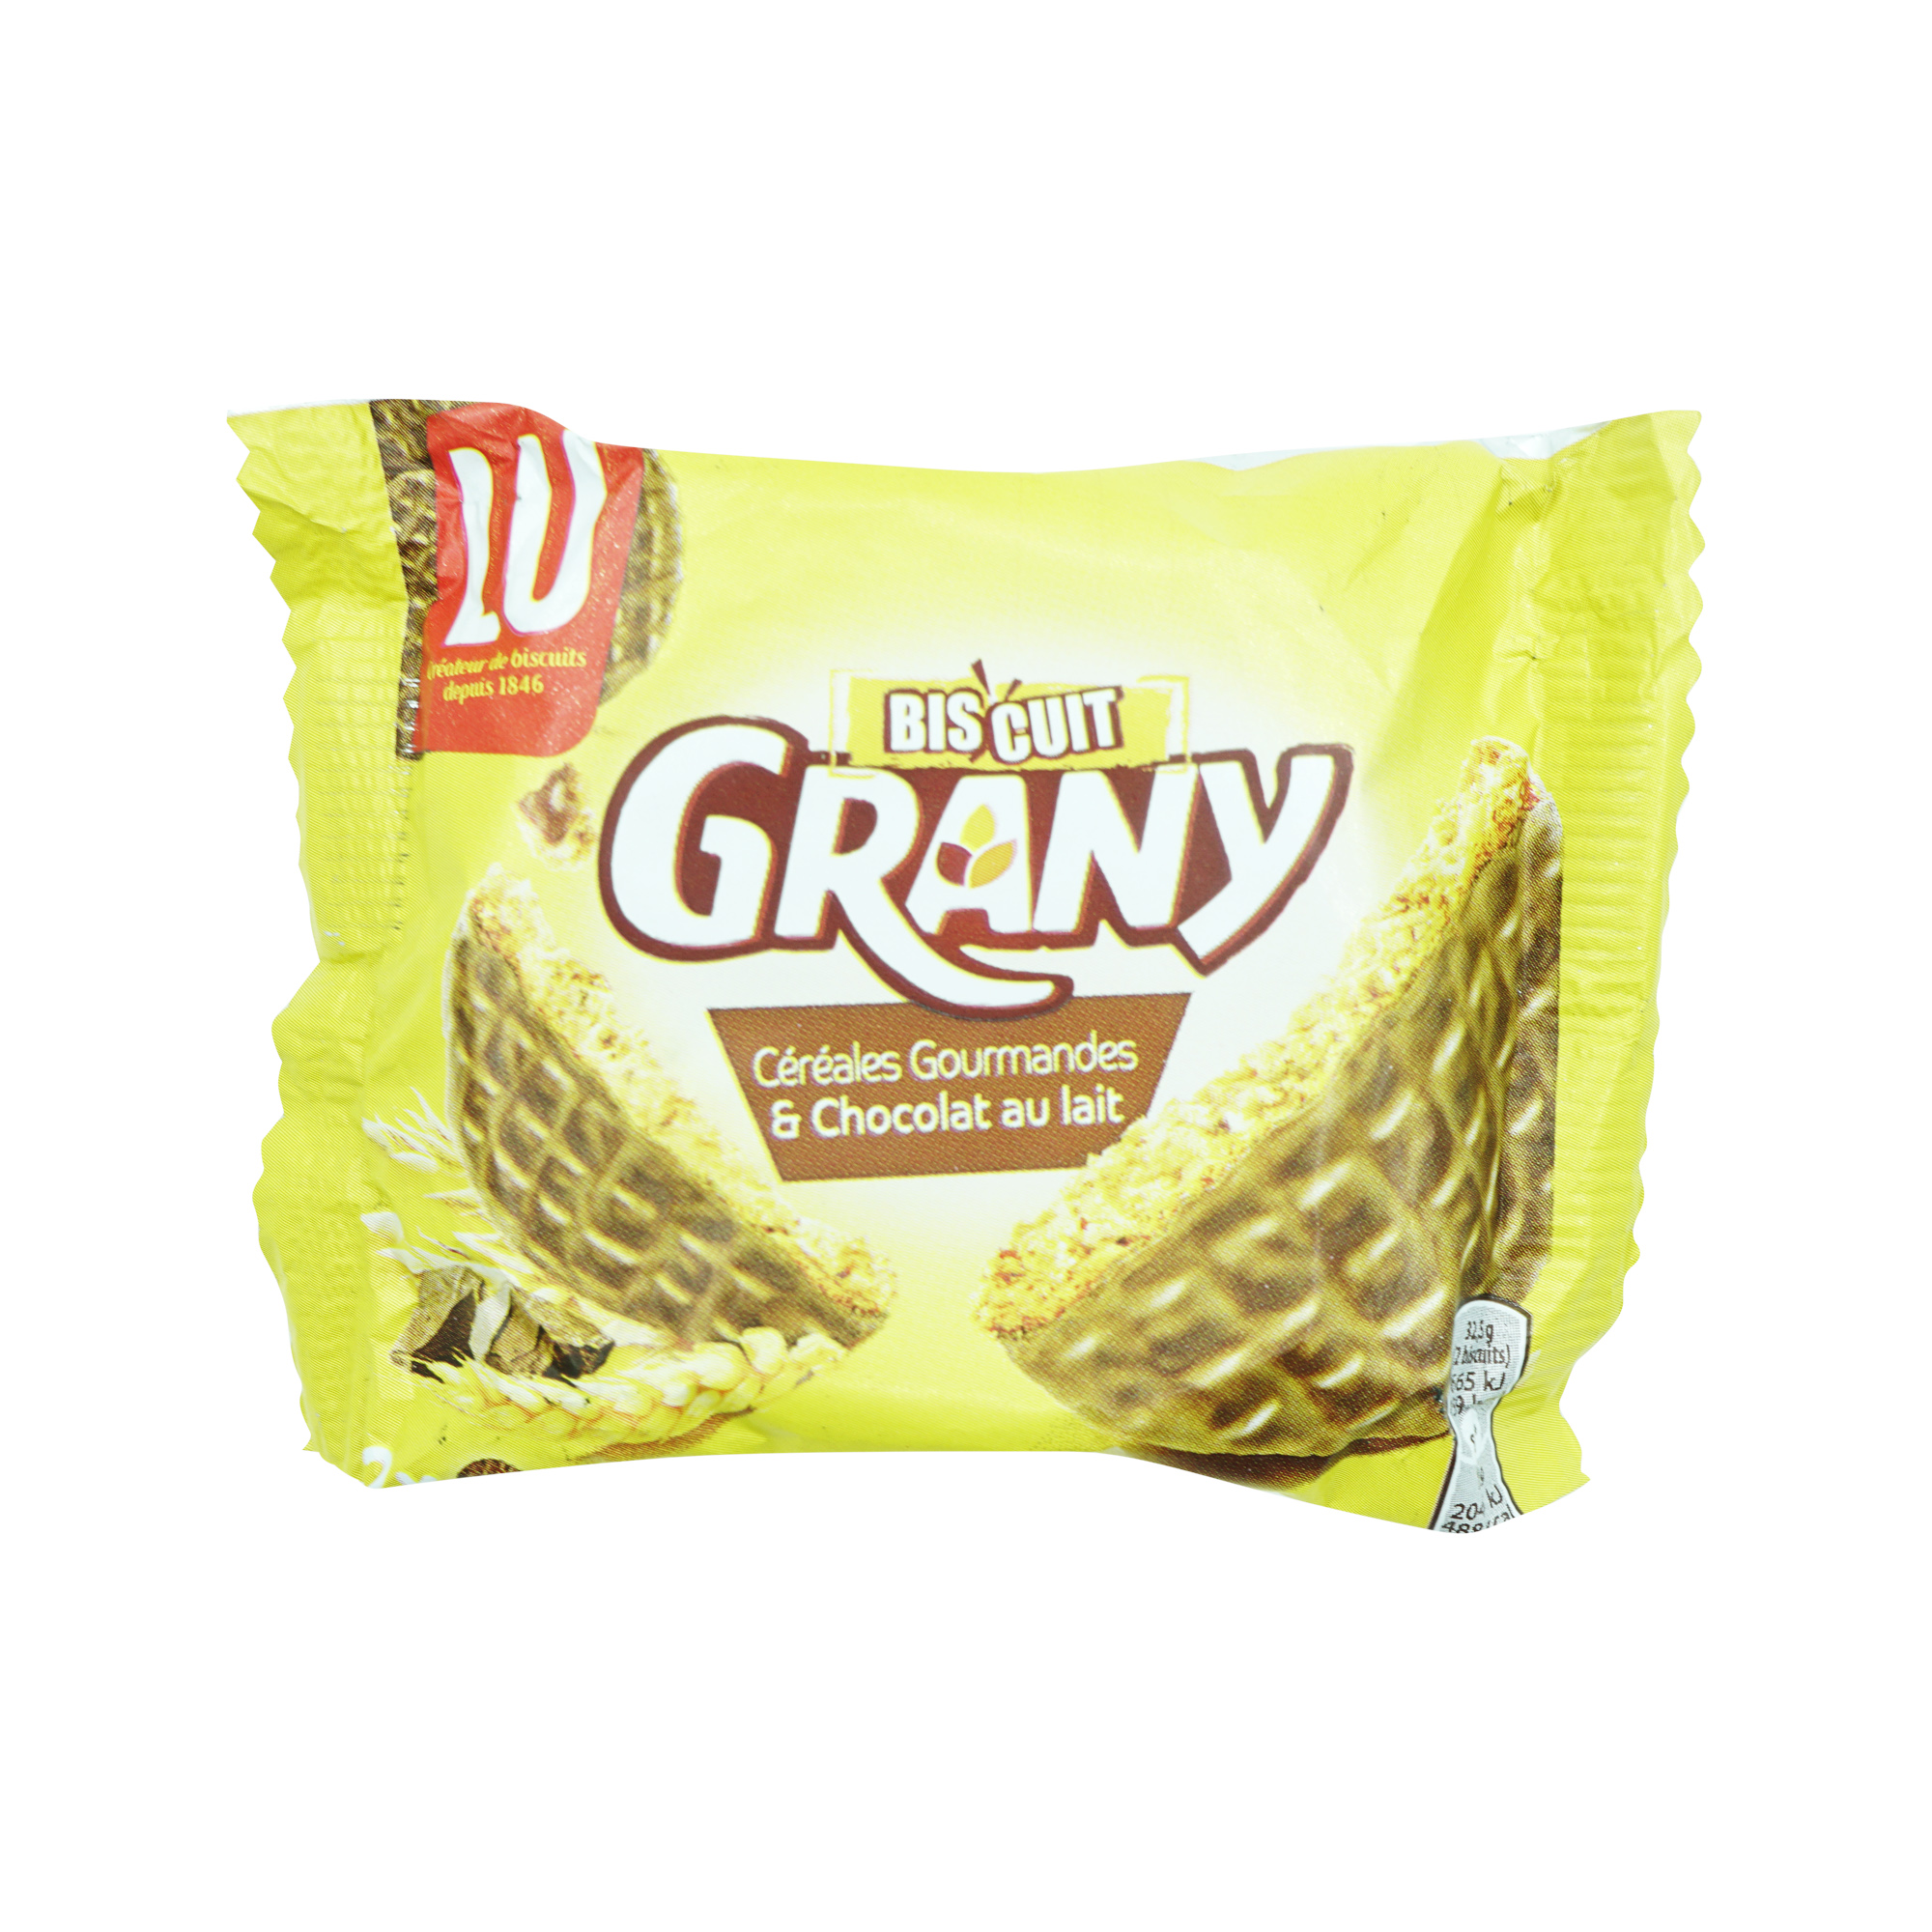 Grany Cereal Chocolate Biscuit (32.5g)